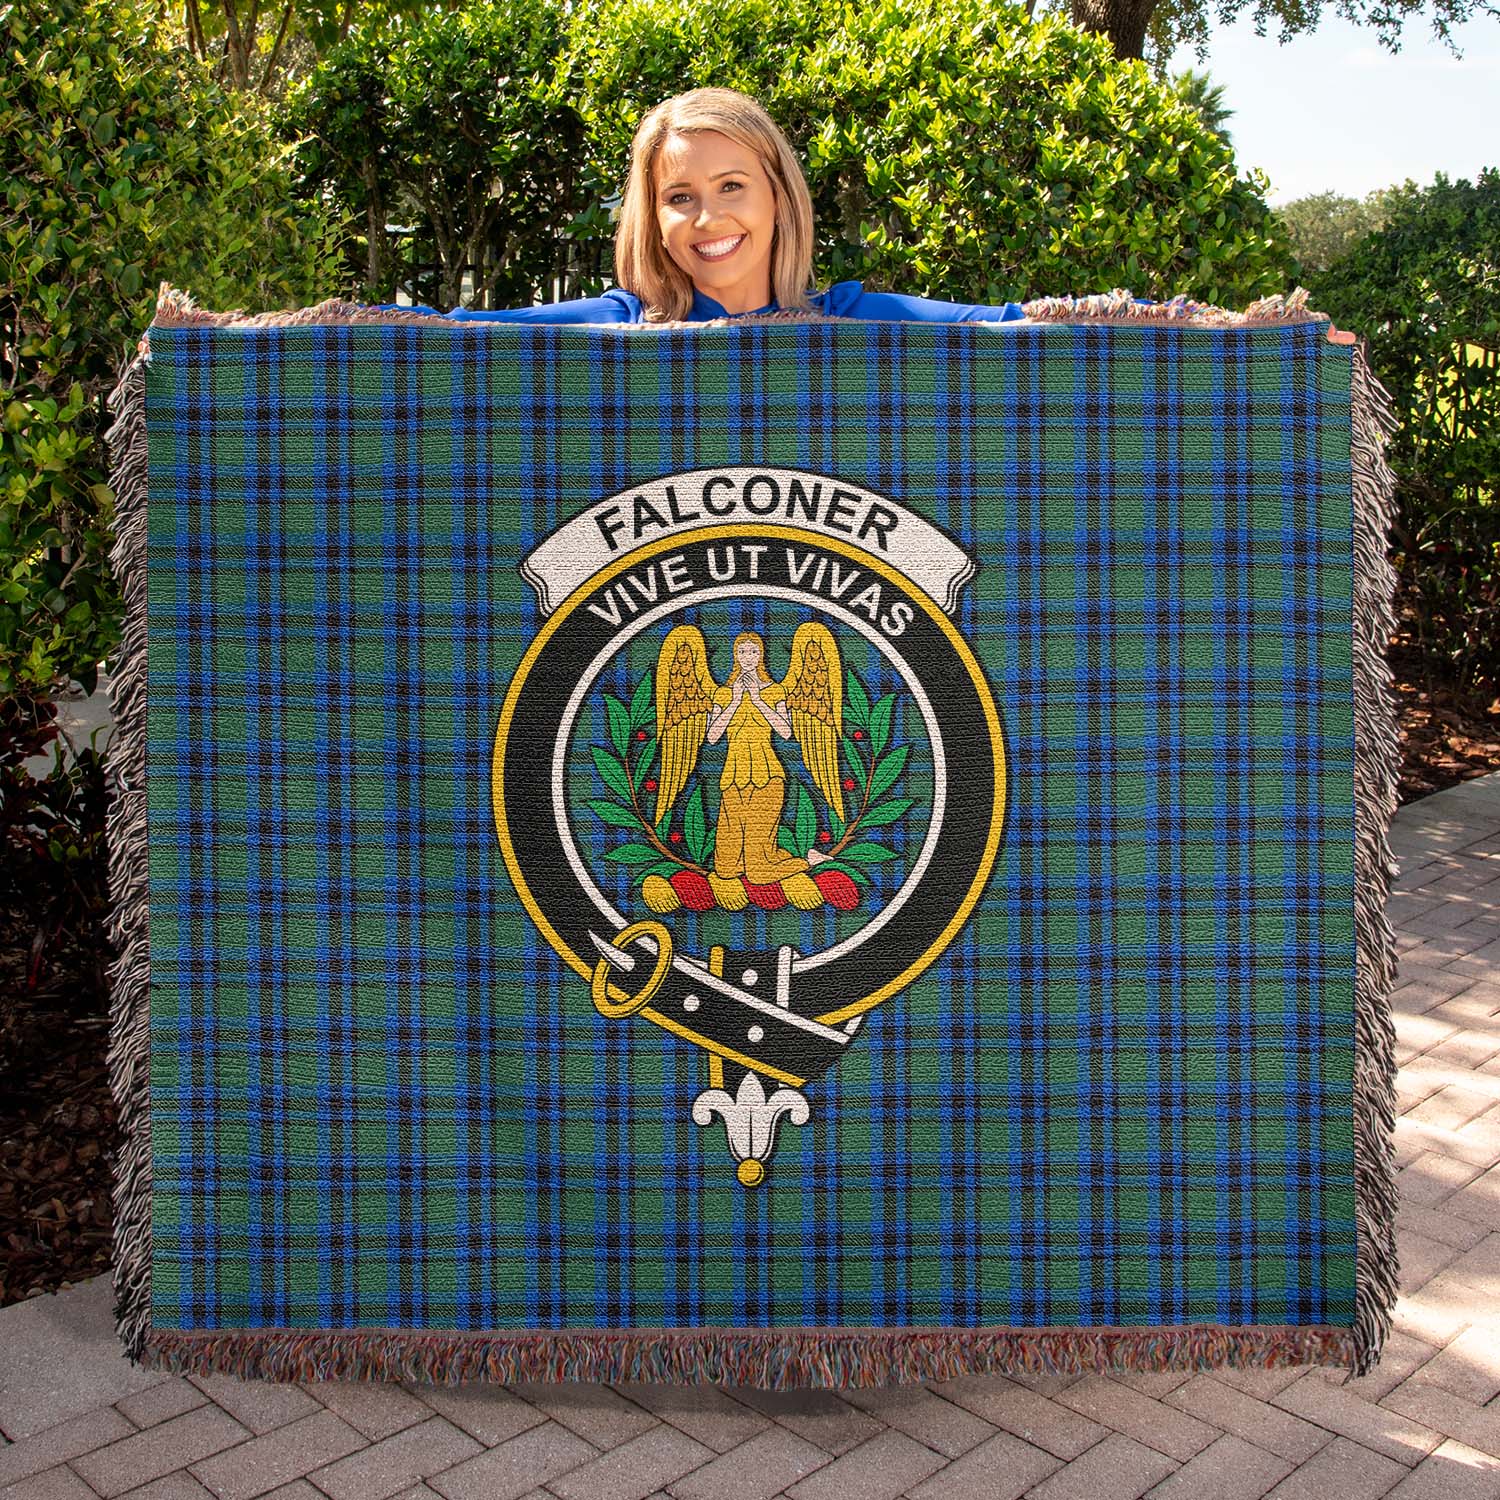 Tartan Vibes Clothing Falconer Tartan Woven Blanket with Family Crest